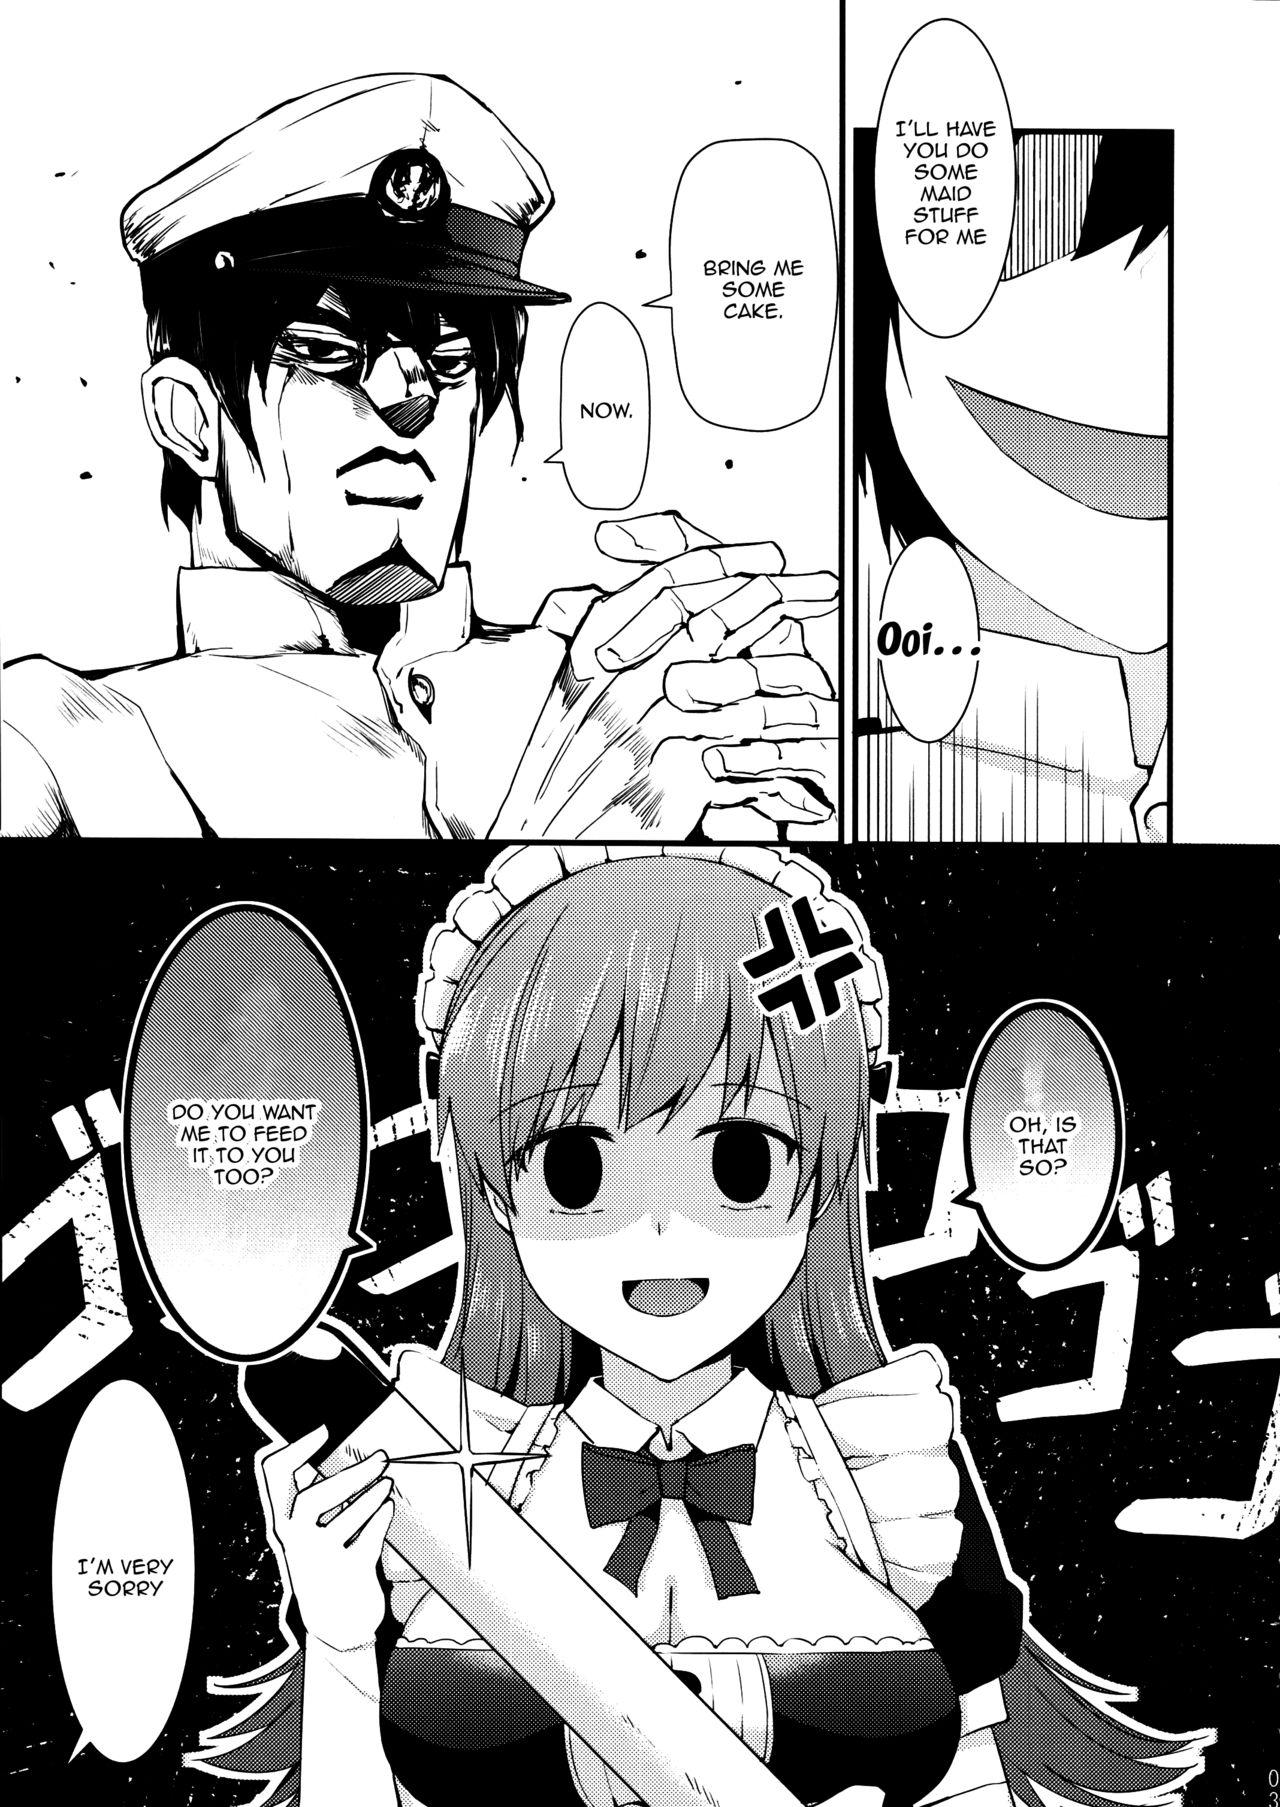 Bangbros Ooi! Maid Fuku o Kite miyou! | Ooi! Try On These Maid Clothes! - Kantai collection Pussy Lick - Page 4